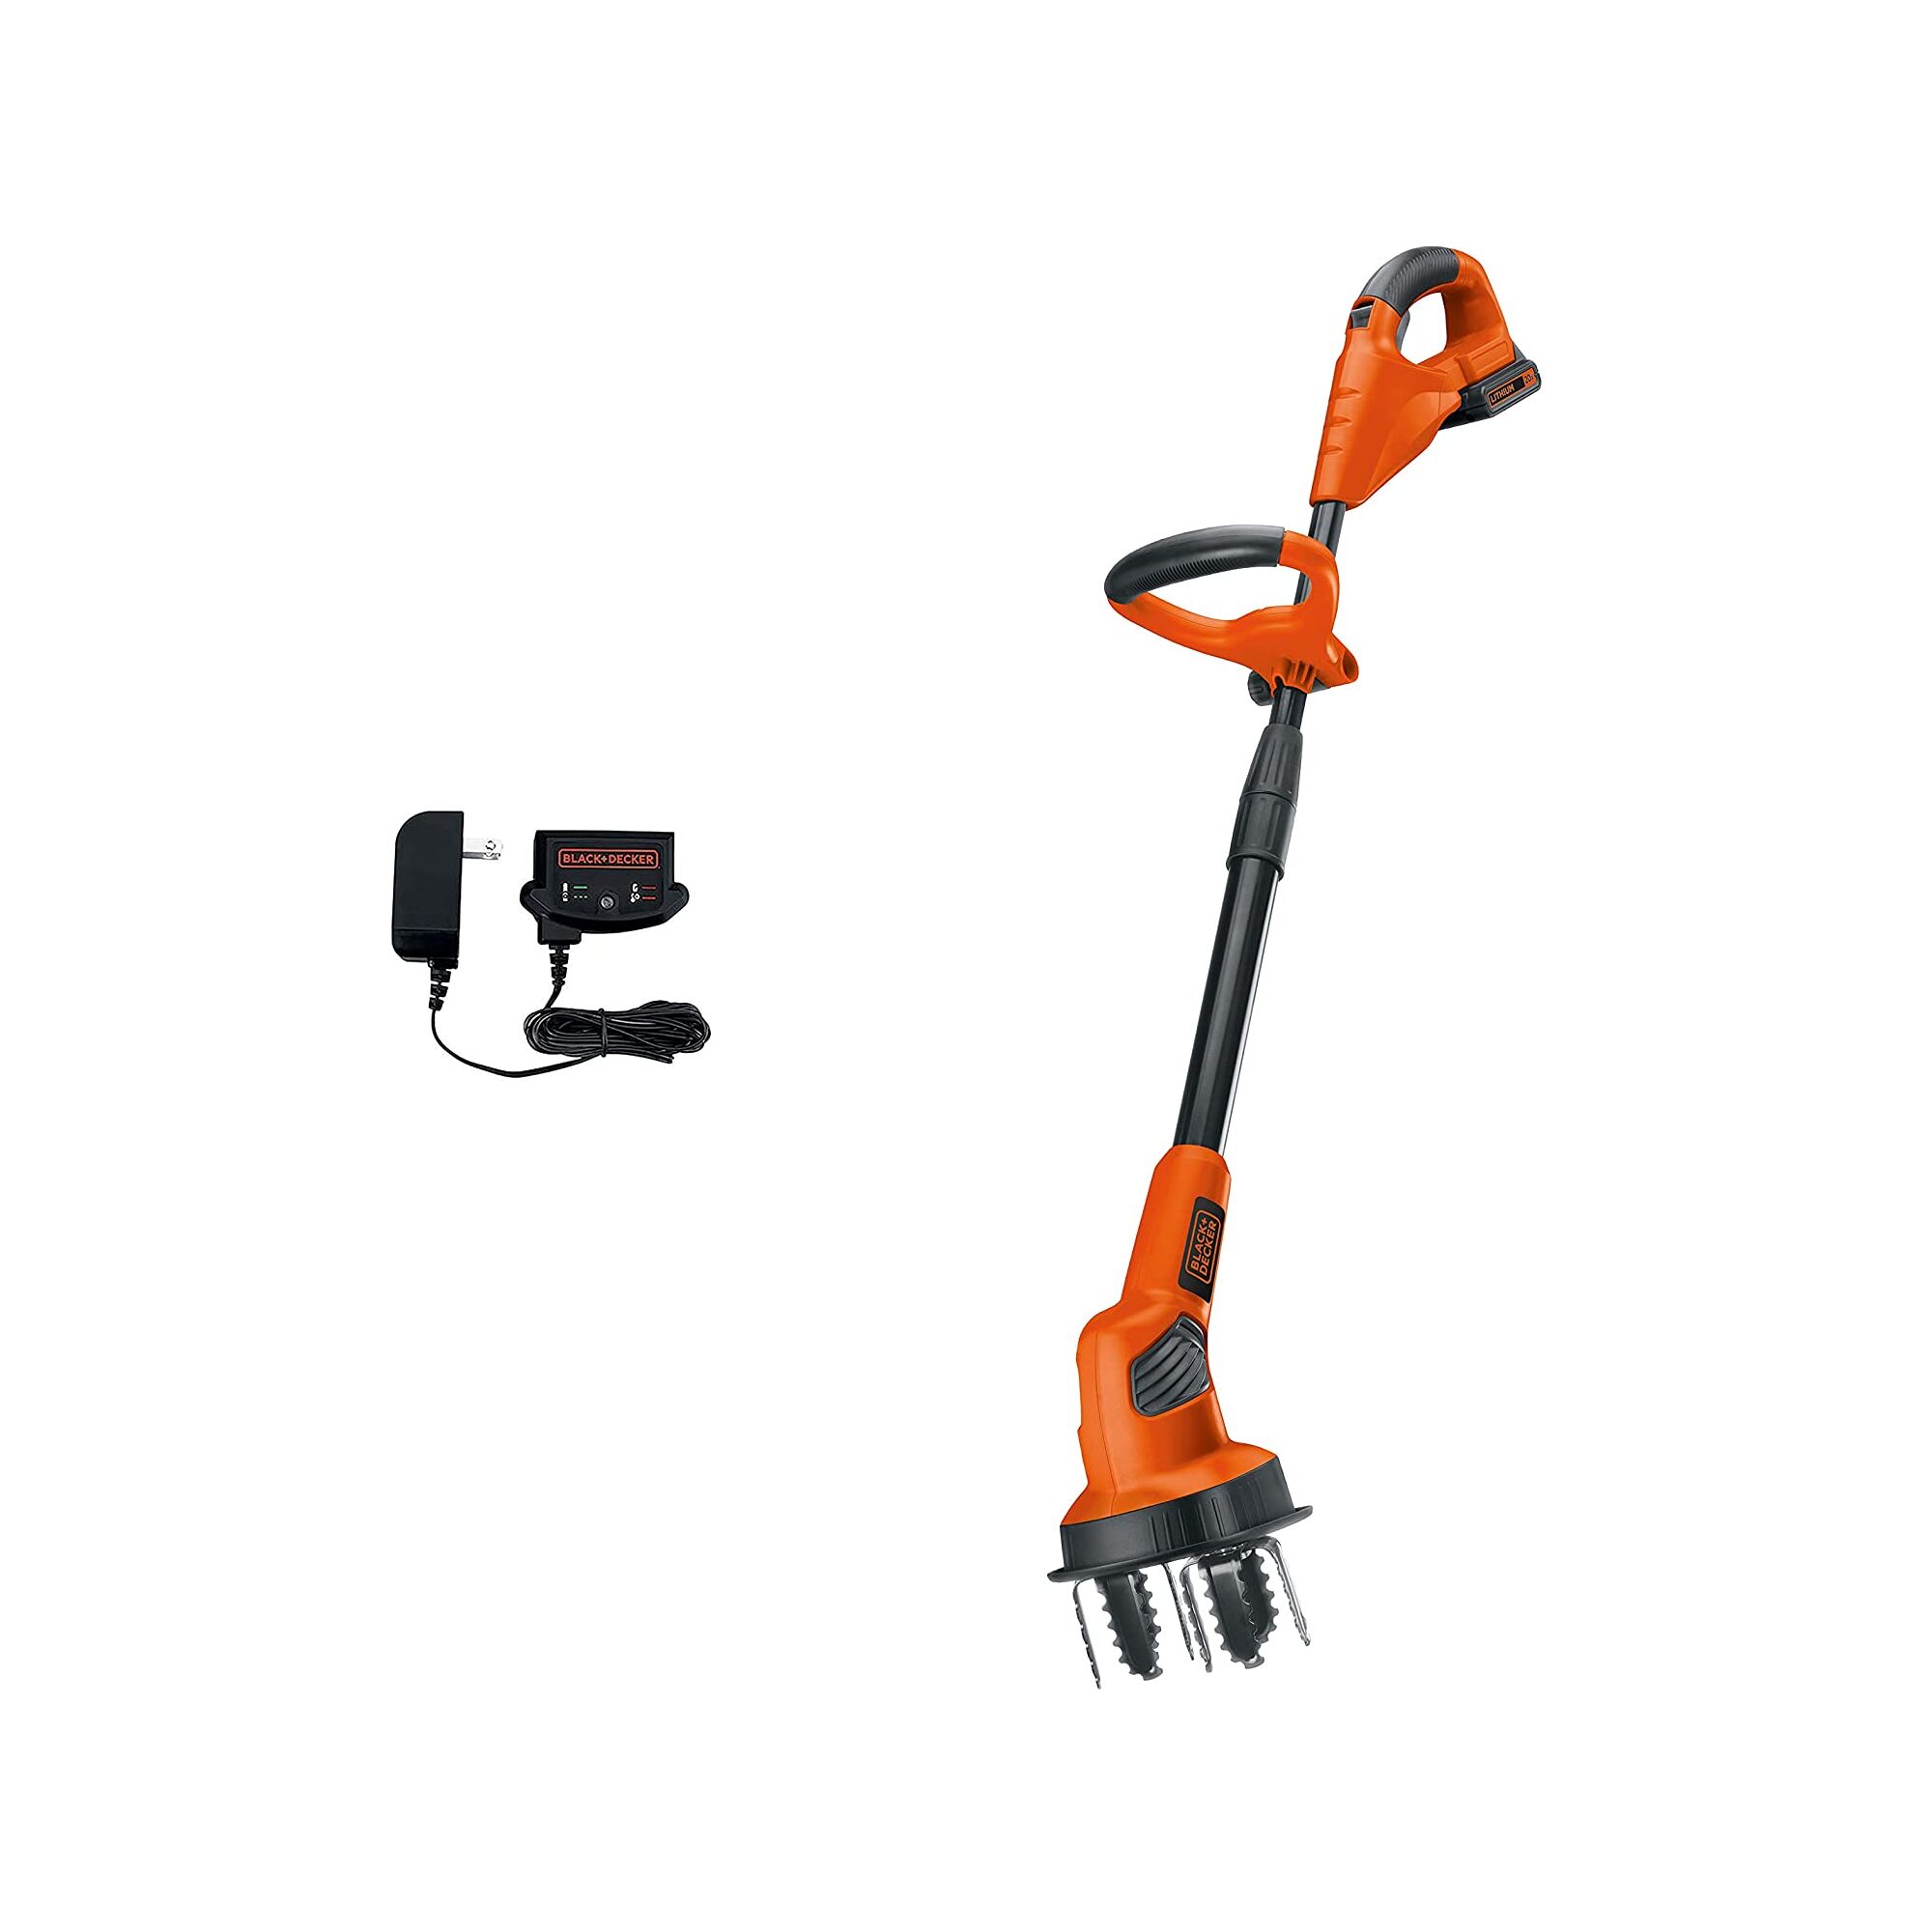 Profile of 20 volt max lithium garden cultivator with battery and charger